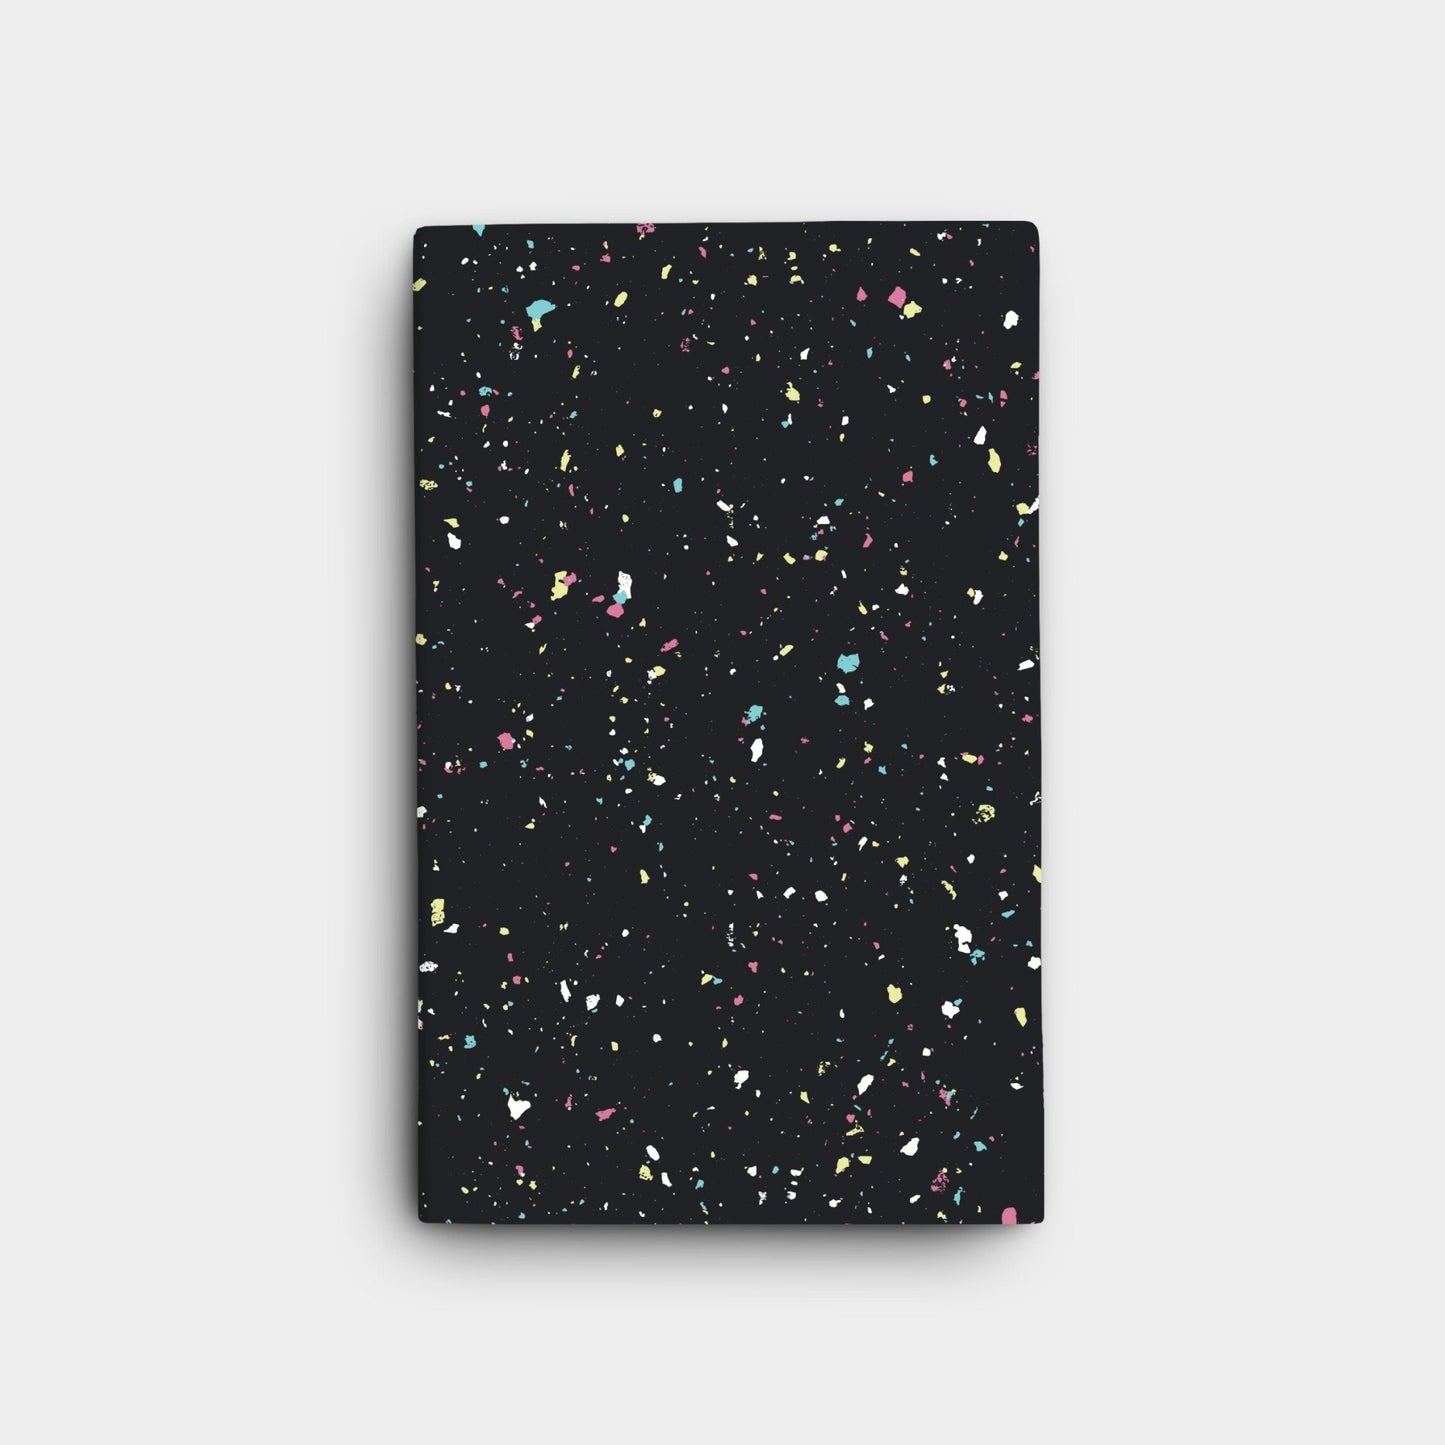 Flecked Hard Cover Journal III The Design Craft